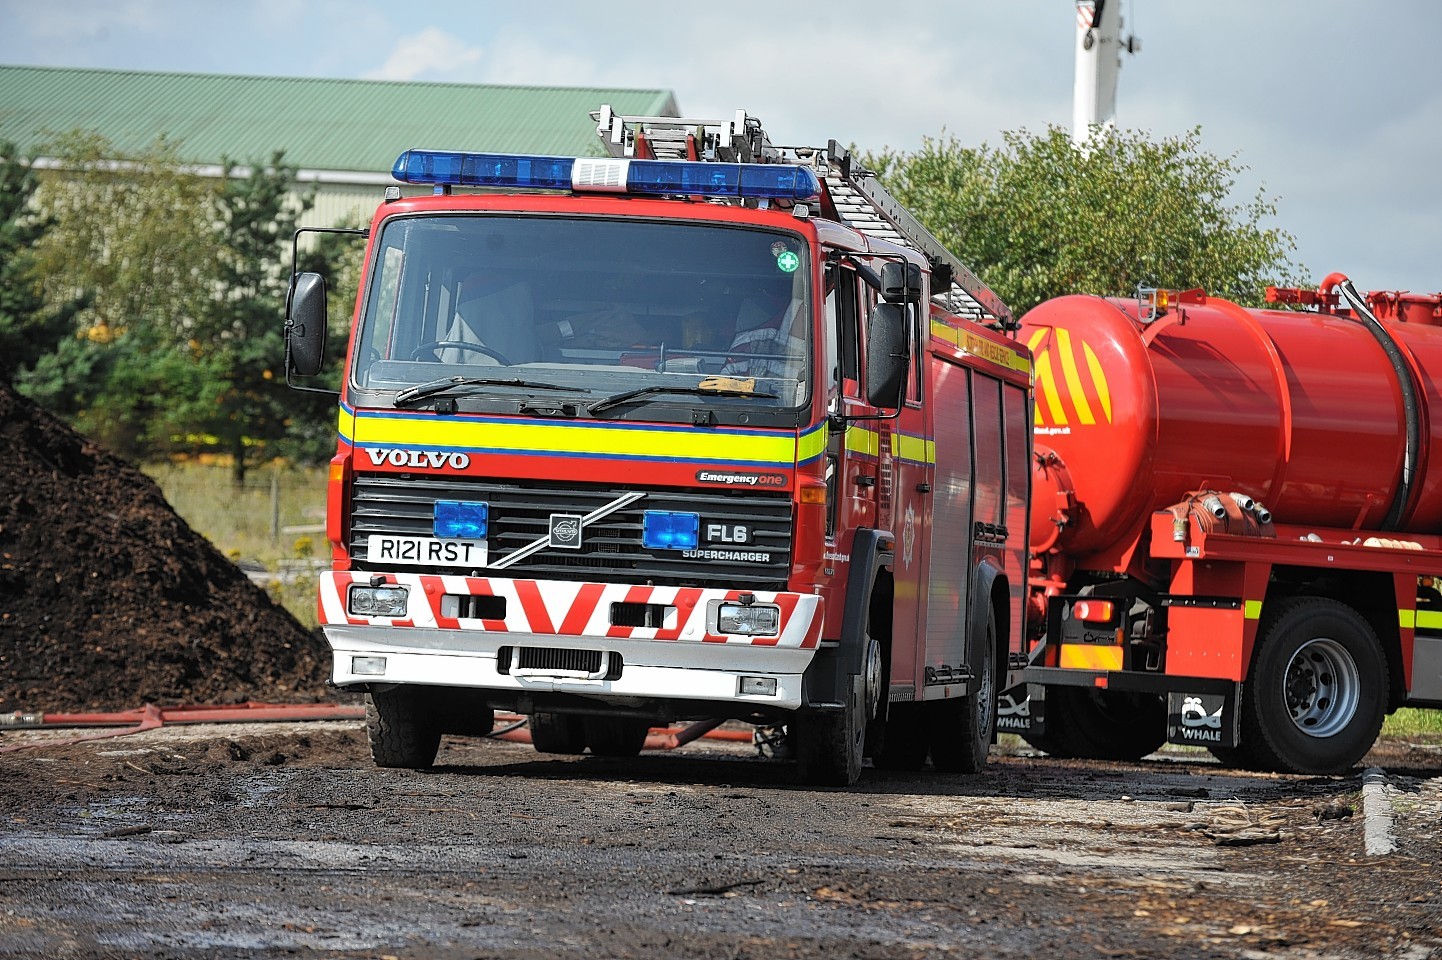 Fire at the Cromarty Firth Industrial Estate